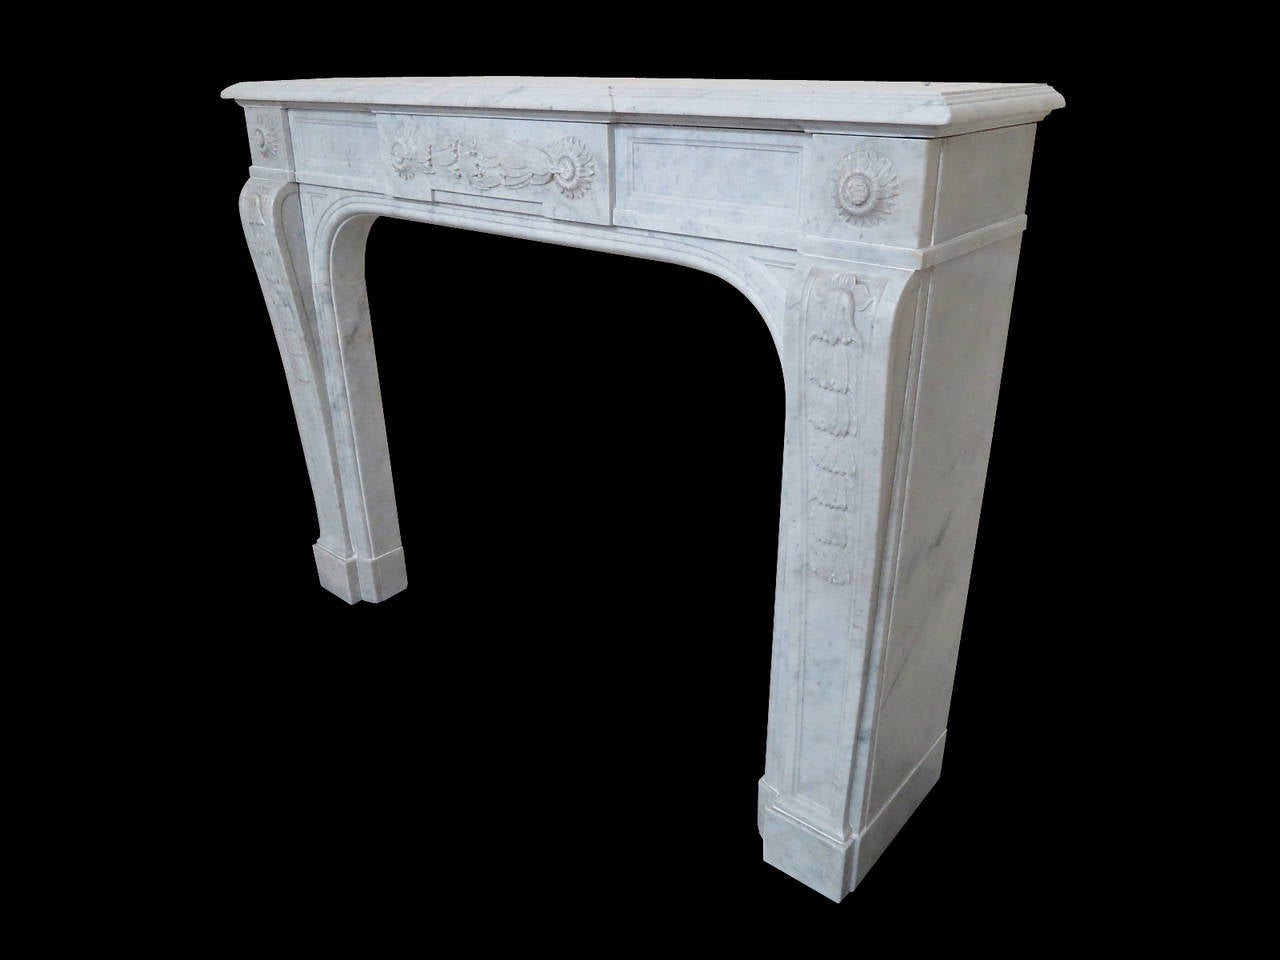 Molded Antique French Louis XVI Style Fireplace Mantel in Carrara Marble